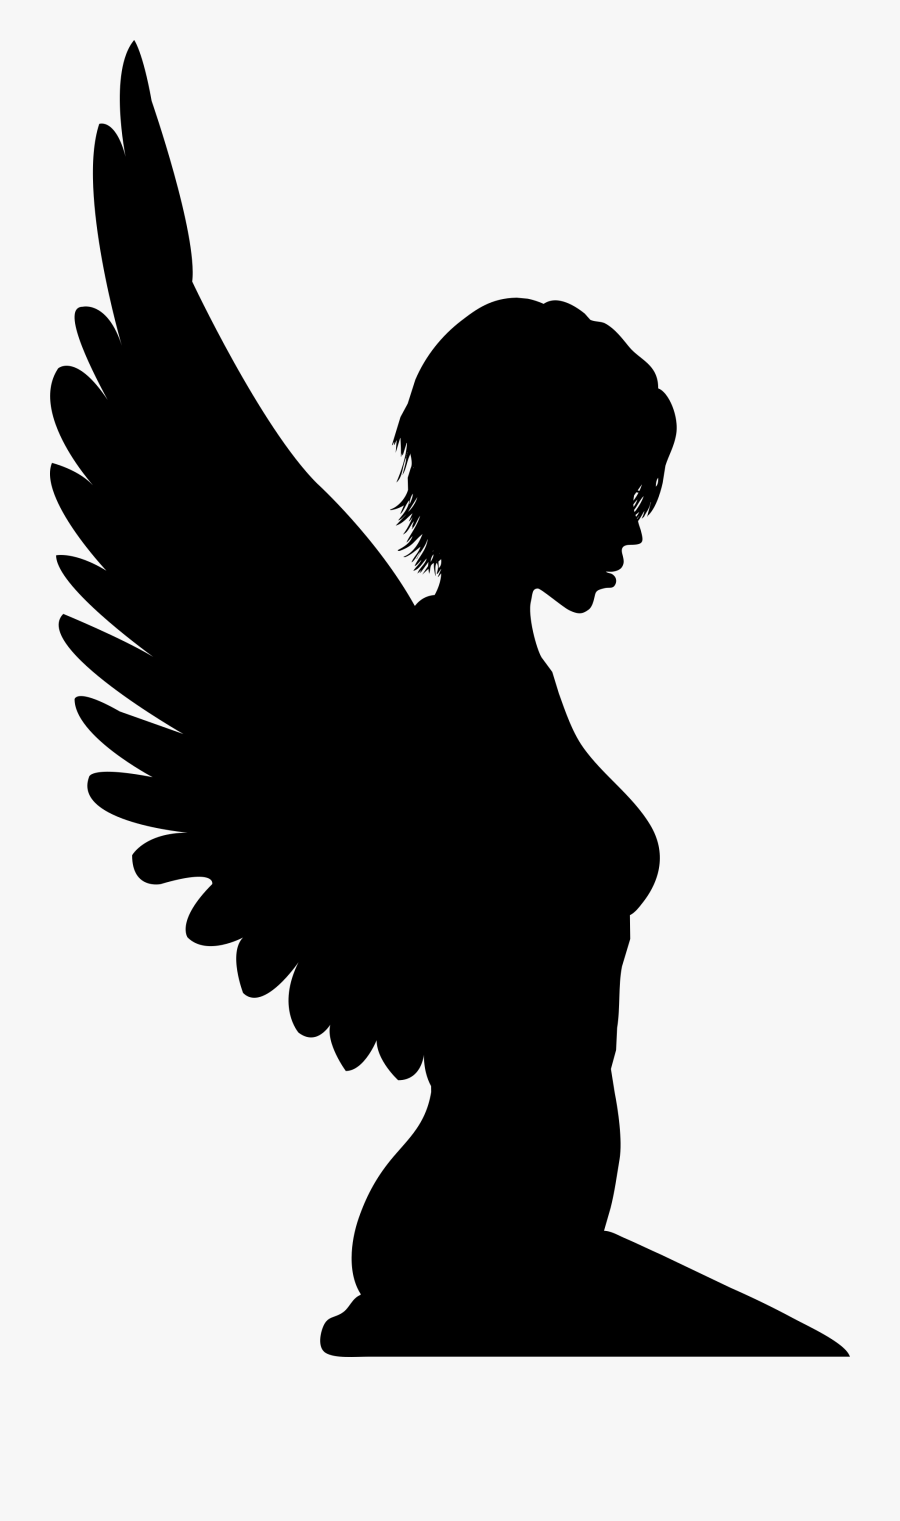 Woman With Wings Silhouette - Silhouette Of Woman With Wings, Transparent Clipart